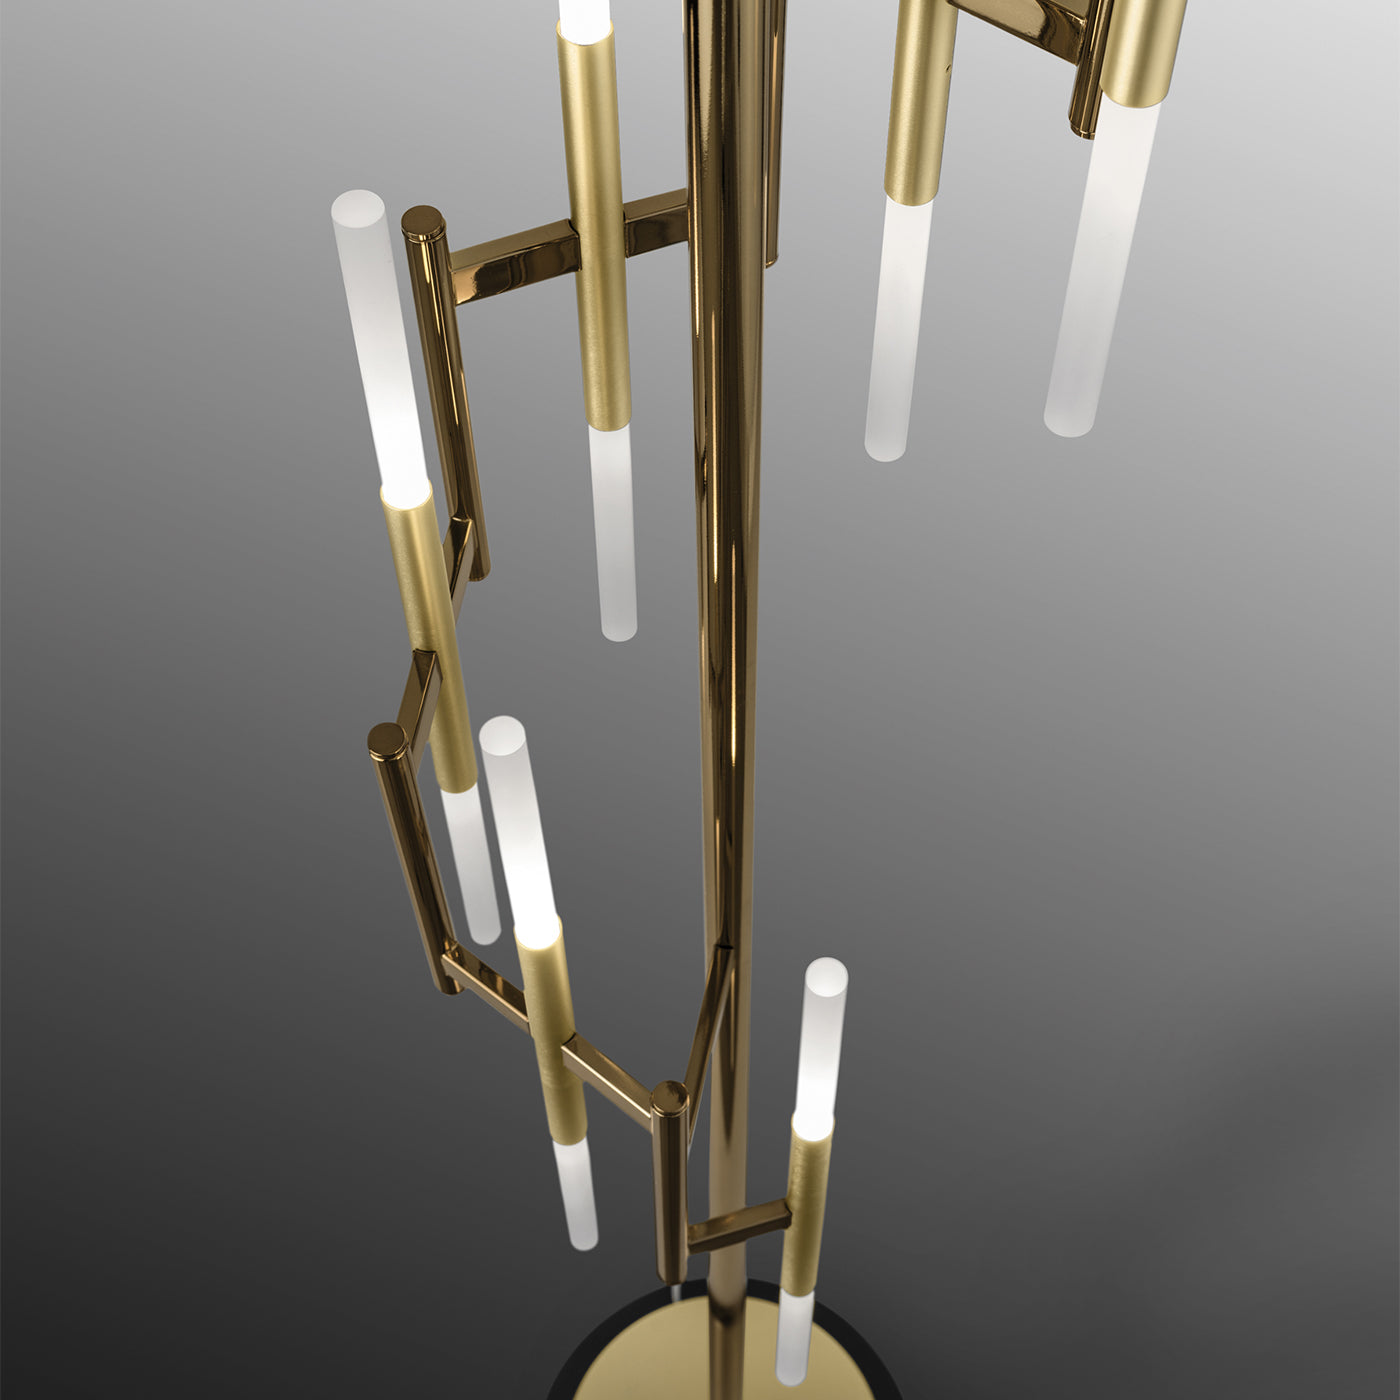 12-Light Ekle Floor Lamp in Brushed Gold with Bronze Accents - Alternative view 2